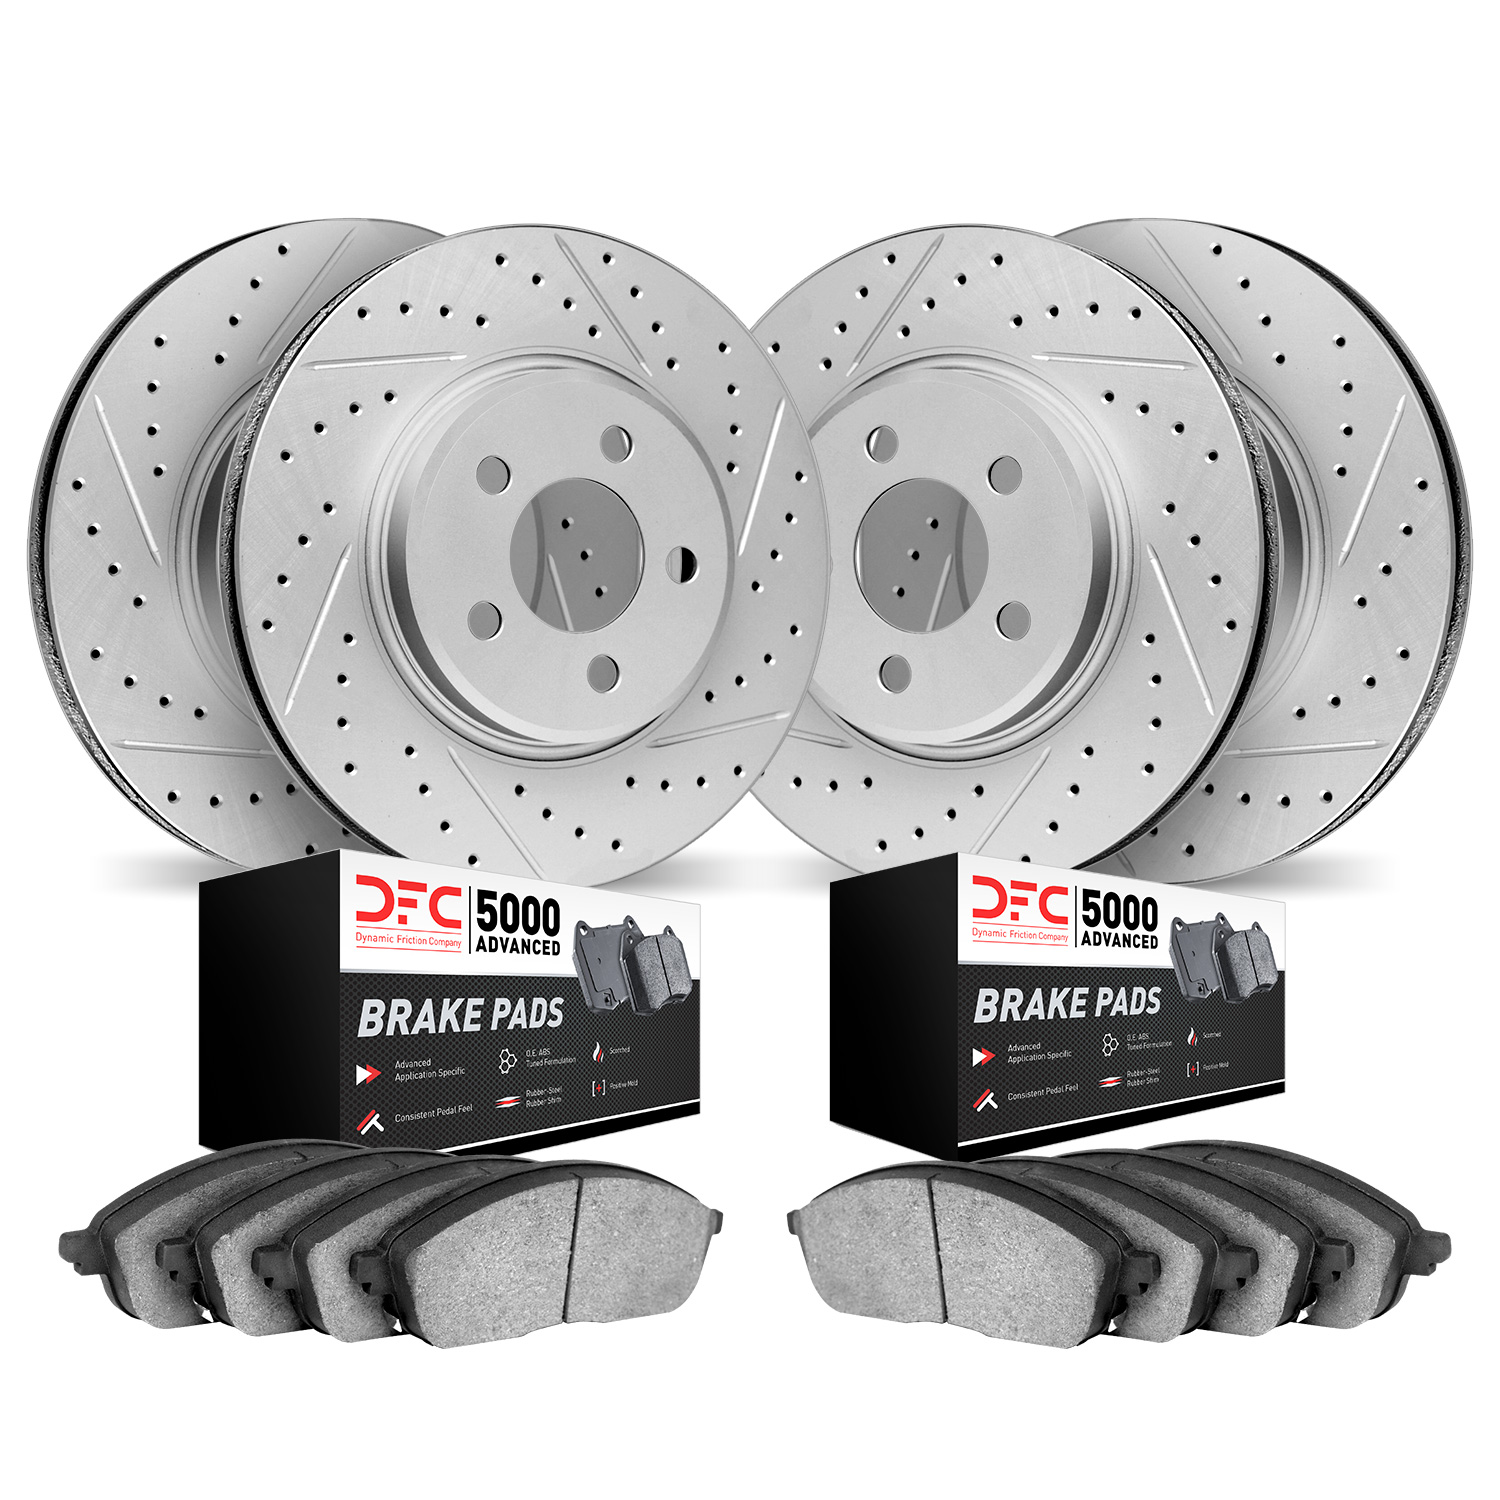 2504-80021 Geoperformance Drilled/Slotted Rotors w/5000 Advanced Brake Pads Kit, 2004-2011 Ford/Lincoln/Mercury/Mazda, Position: